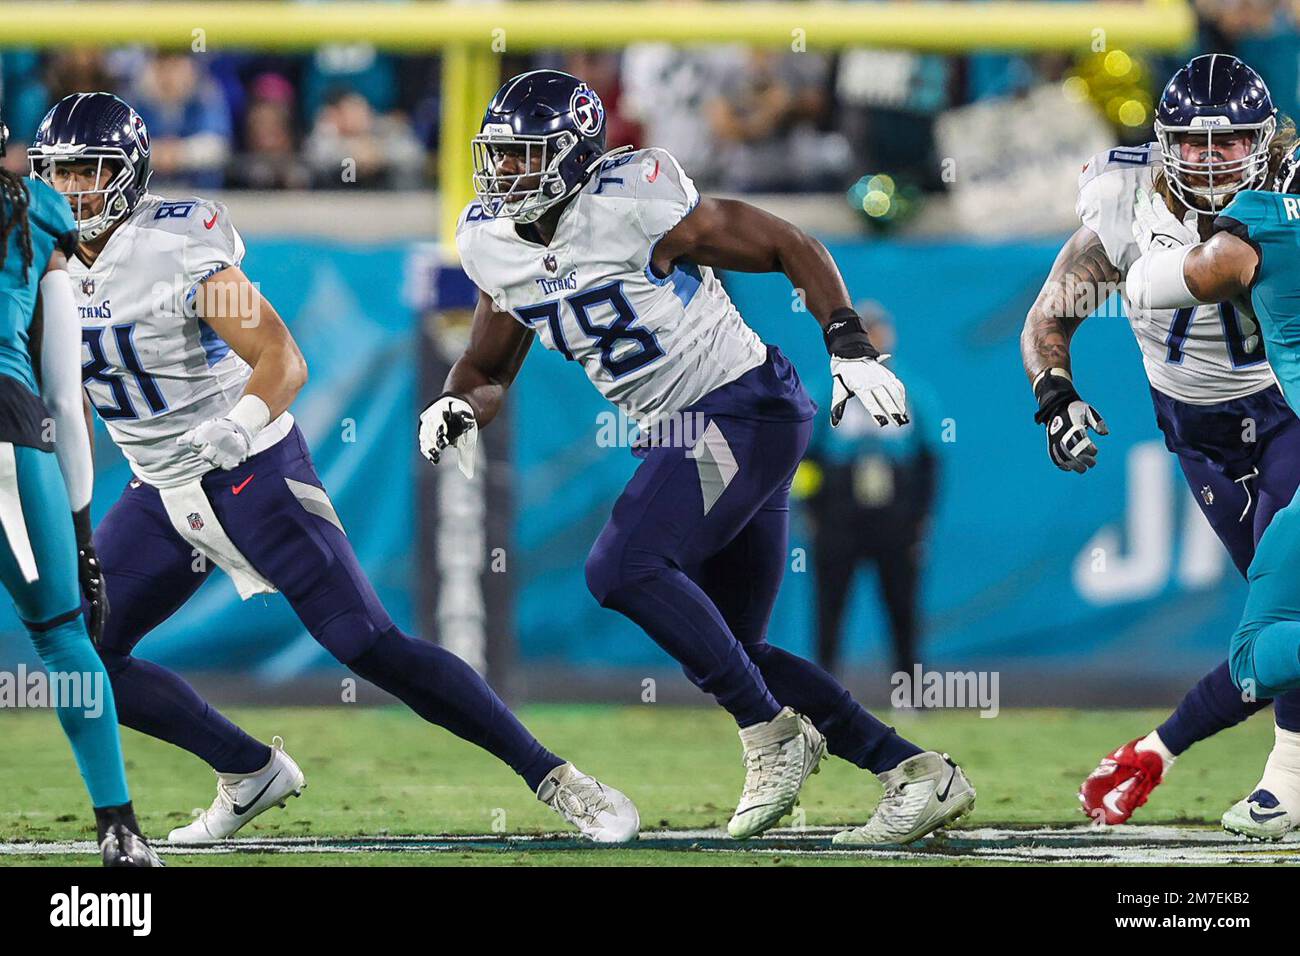 Tennessee Titans offensive tackle Nicholas Petit-Frere (78) in action  during an NFL football game against the Jacksonville Jaguars, Saturday,  Jan. 7, 2023, in Jacksonville, Fla. The Jaguars defeated the Titans 20-16.  (AP